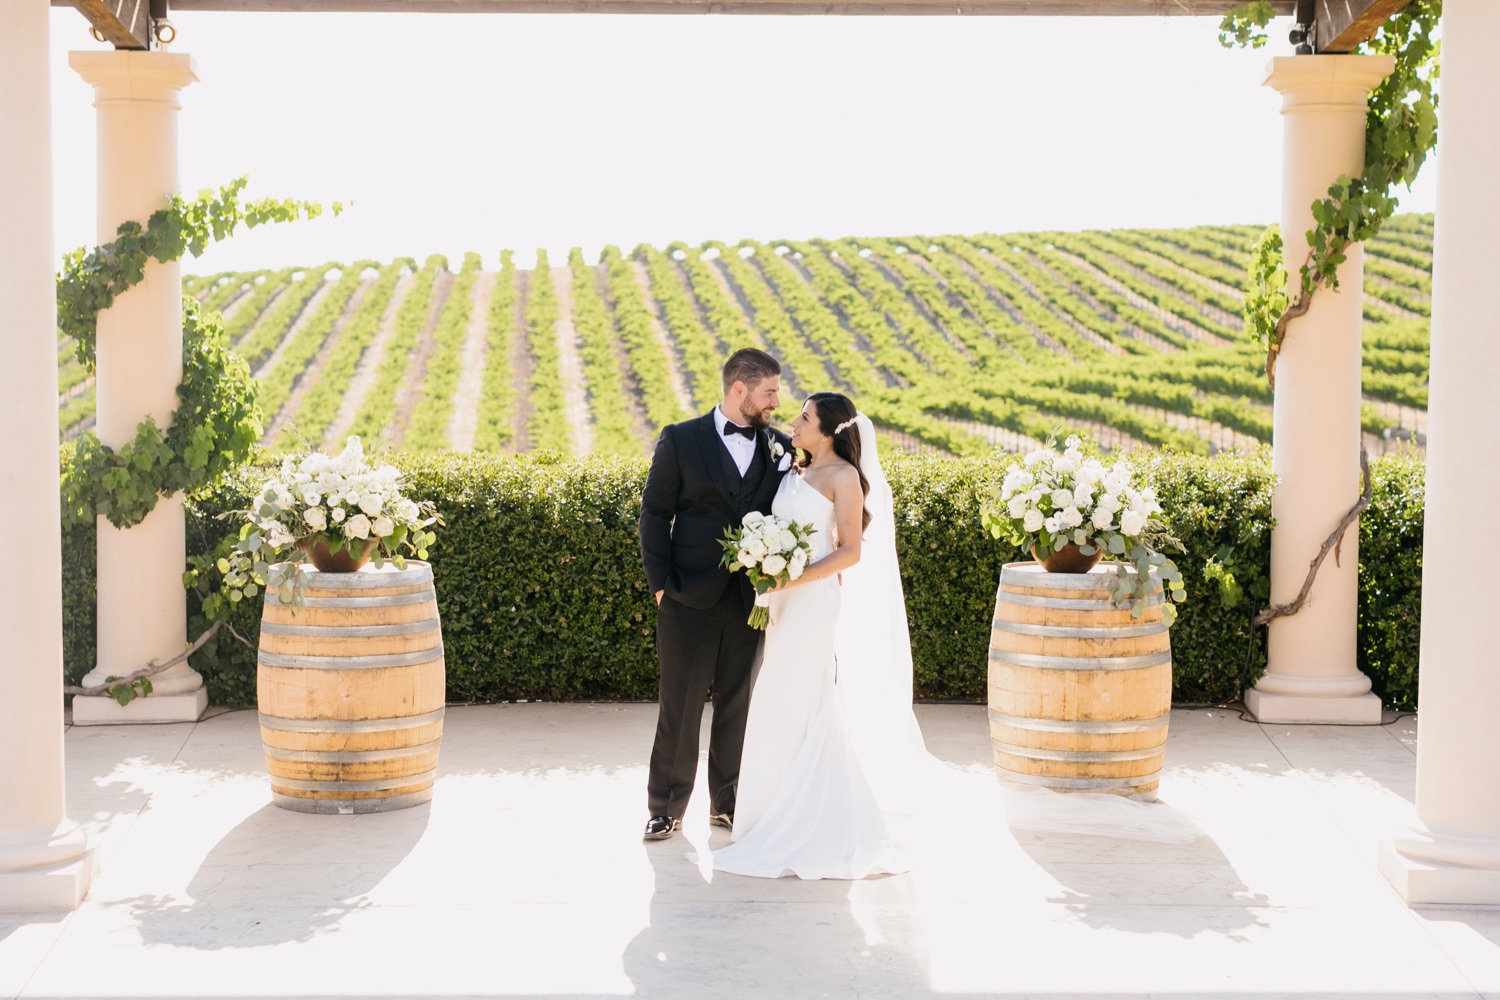 bride and groom smiling at each other during sunset photos at villa san juliette winery in paso robles